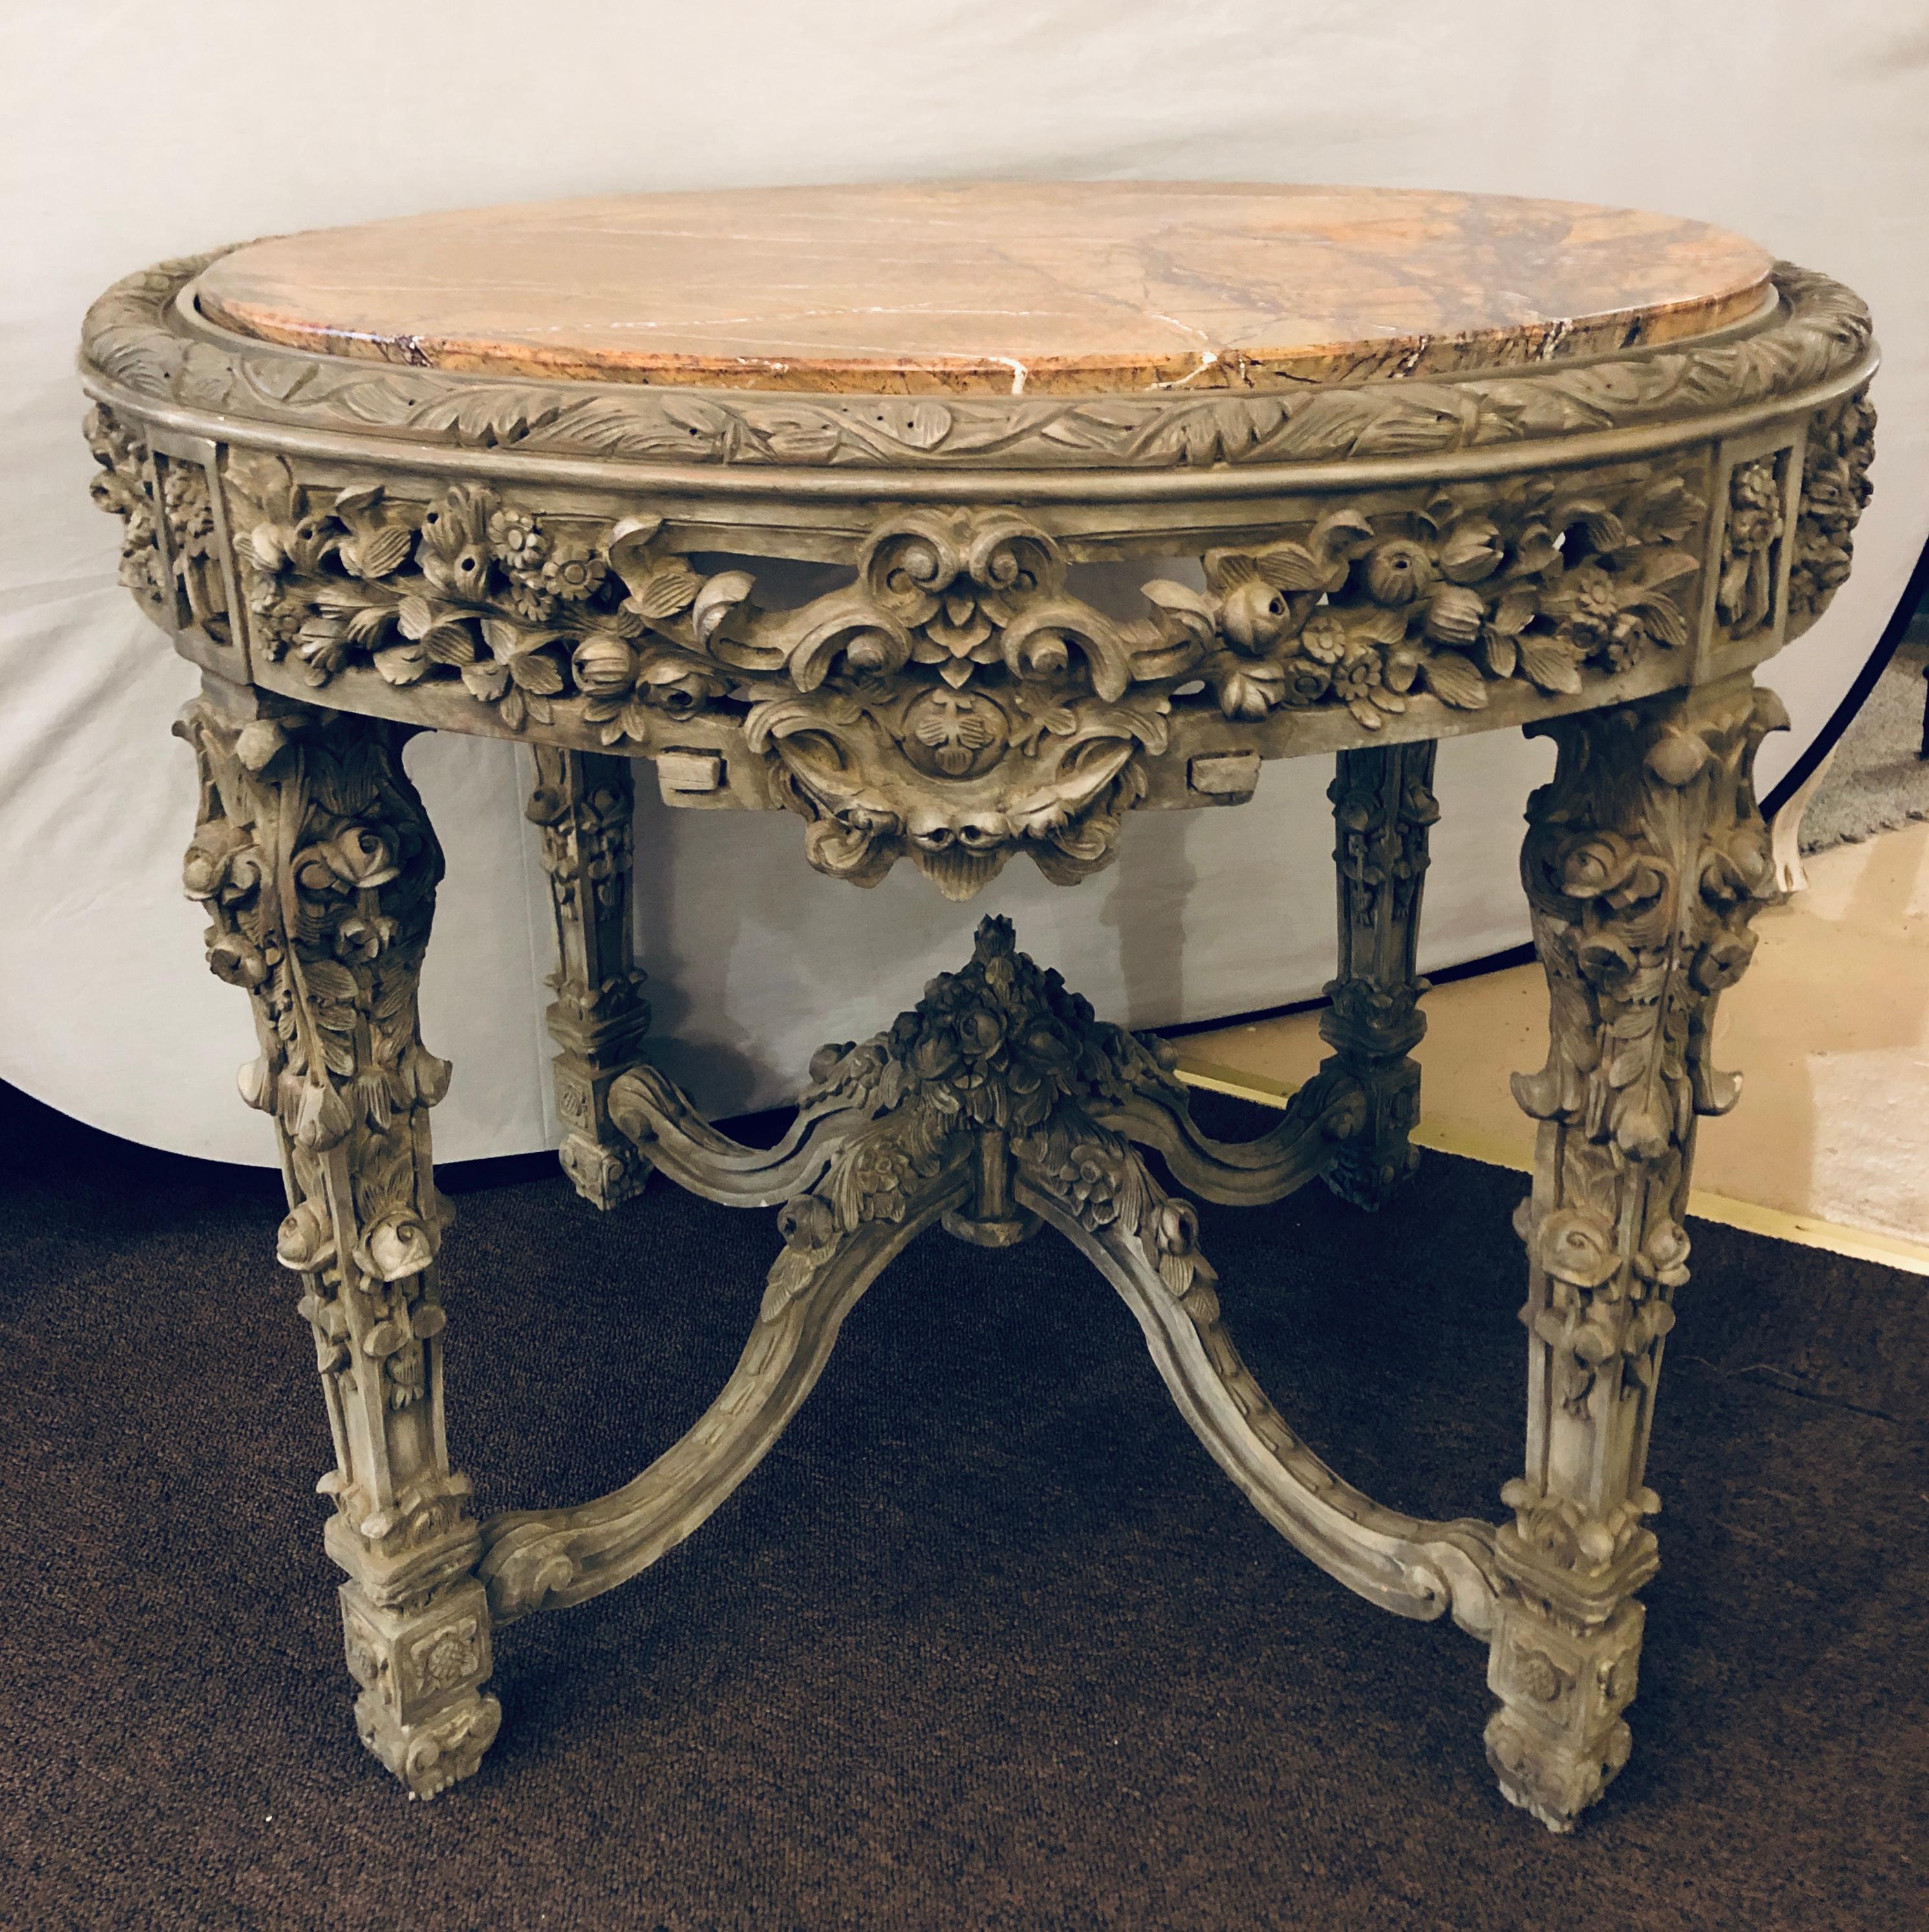 A carved marble top rose and grape with leaf decorated center, dining or end table. The base supporting a large circular marble top. The whole with a wonderfully decorative carved undercarriage supporting a finely carved exceptional table base.